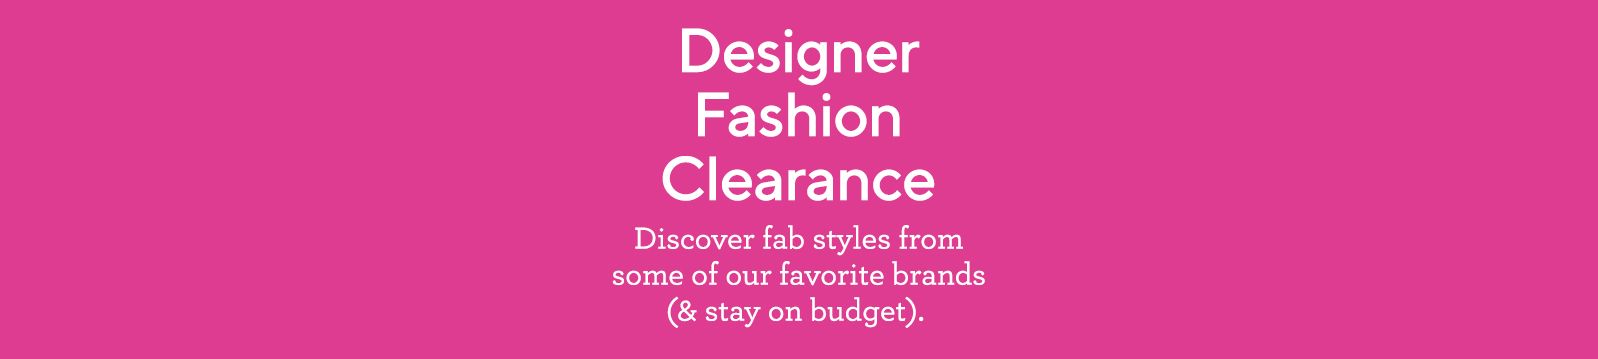 Designer Fashion Clearance Discover fab styles from some of our favorite brands (& stay on budget). 